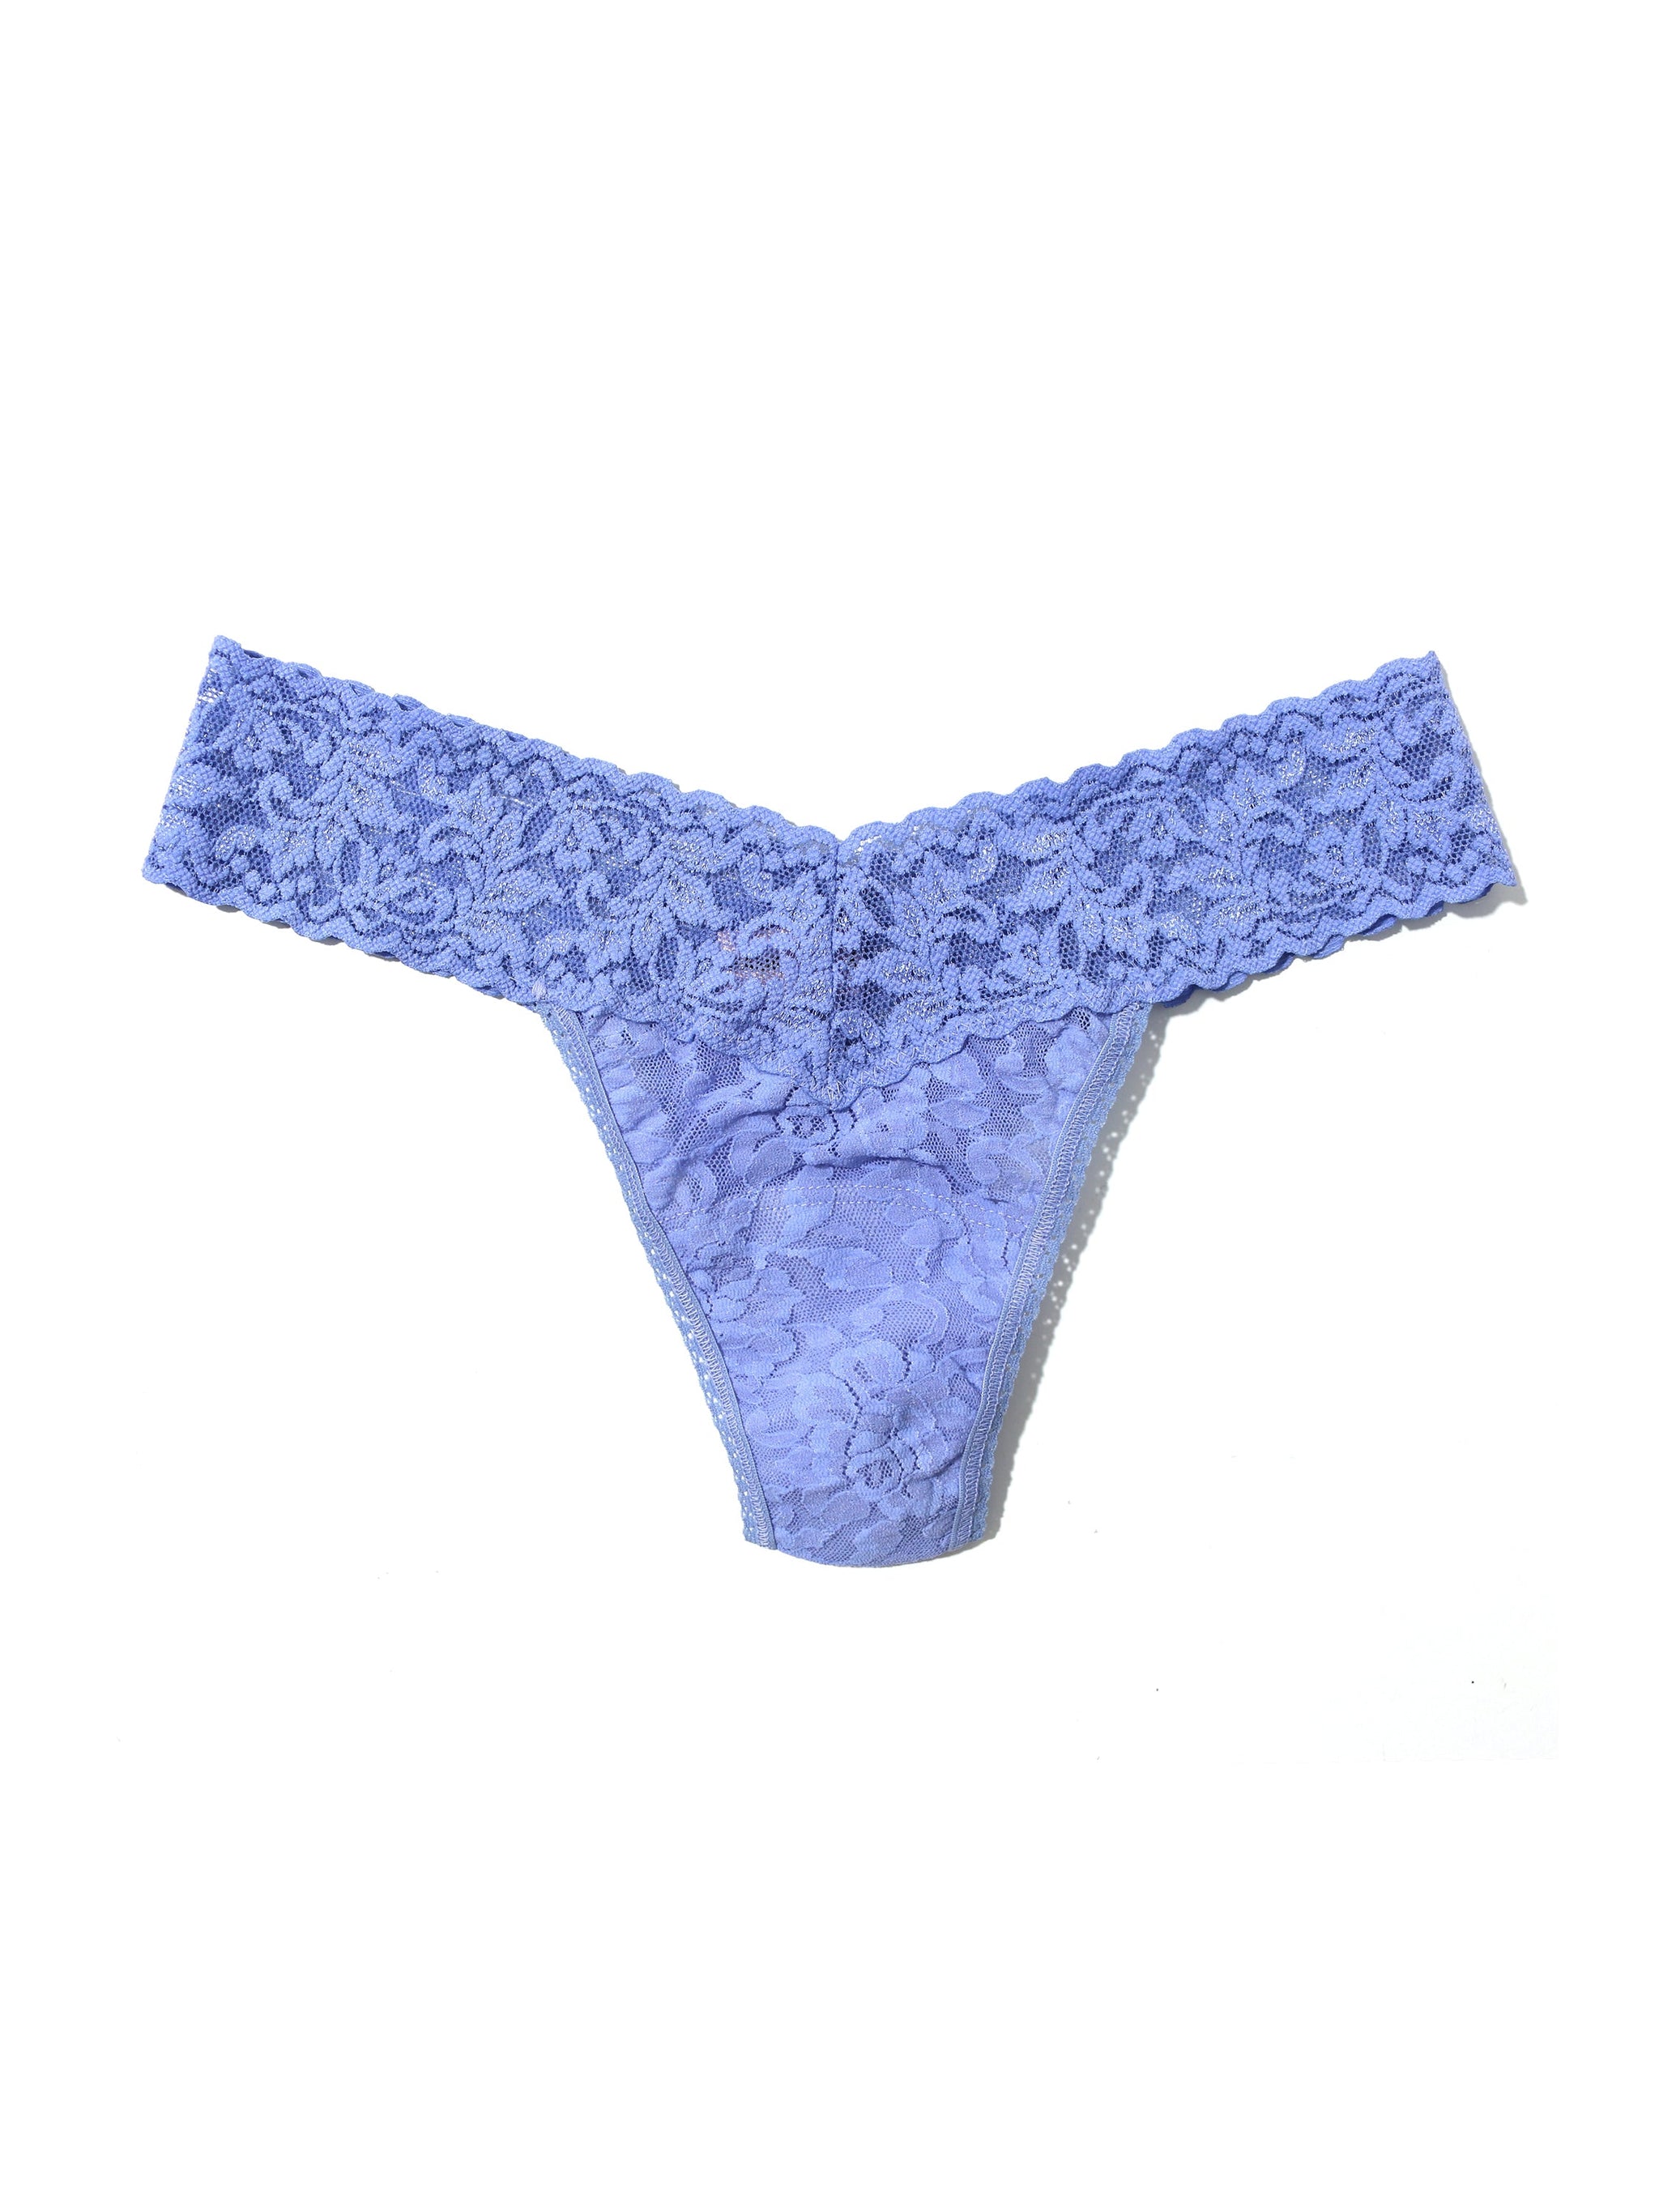 Extra Small Thongs - Lace & Cotton